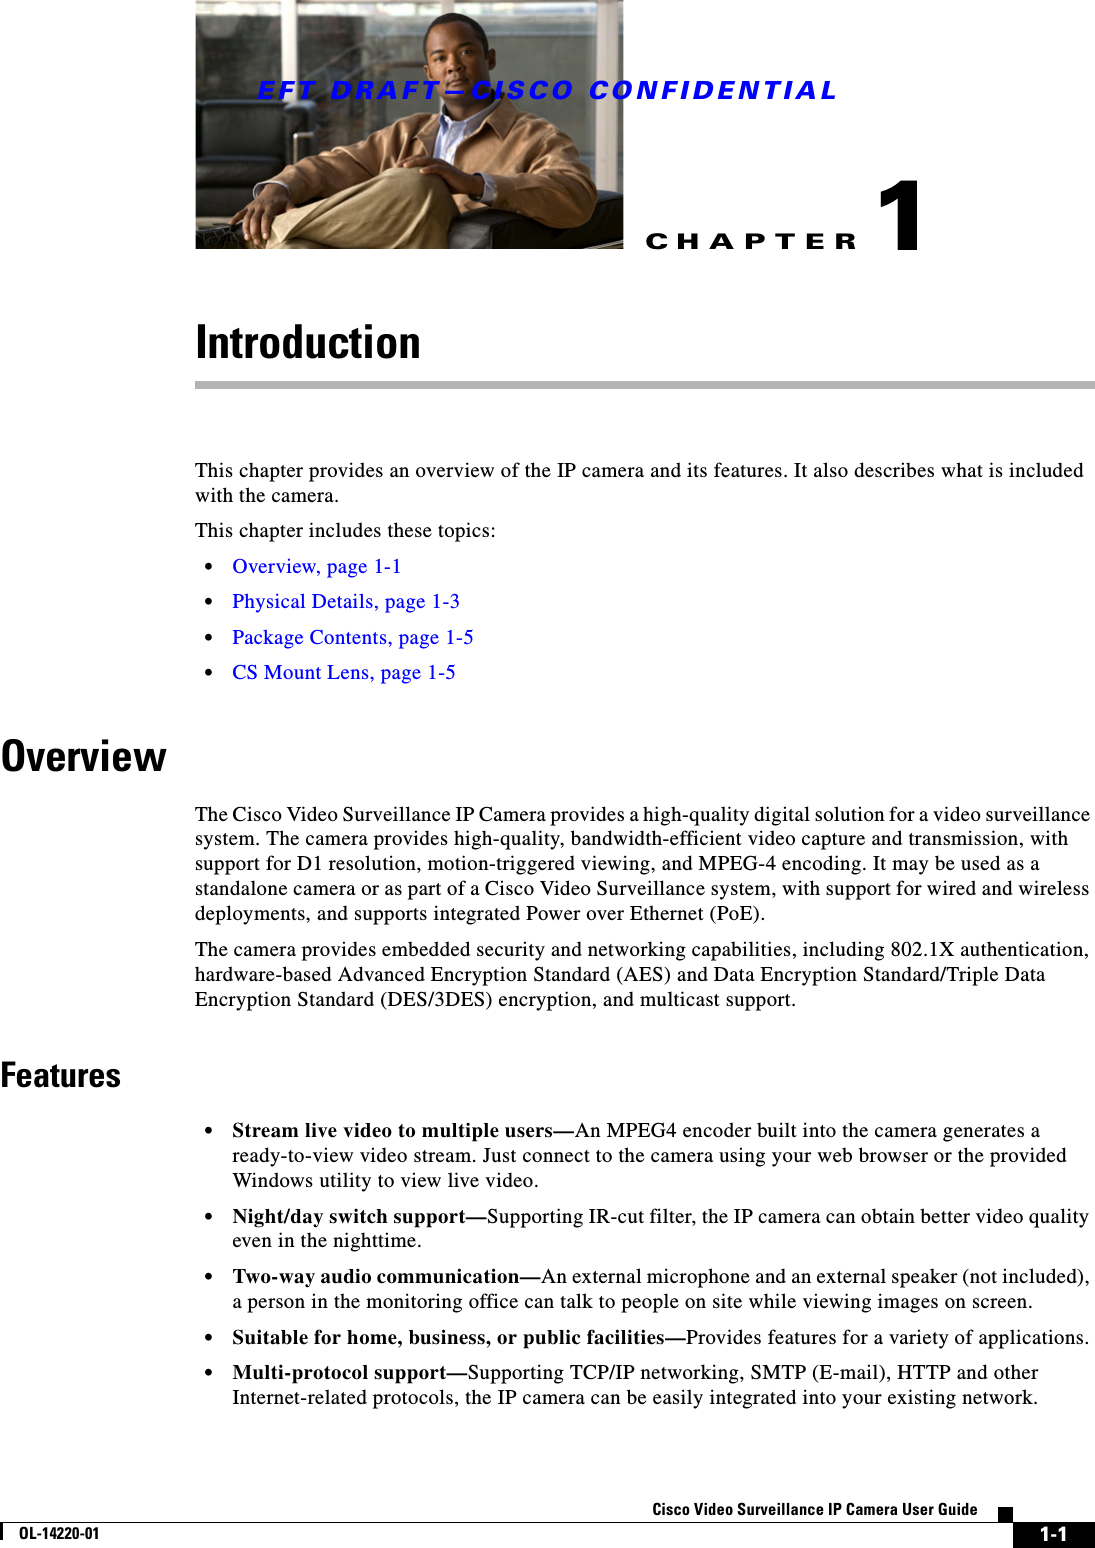 CHAPTEREFT DRAFT—CISCO CONFIDENTIAL1-1Cisco Video Surveillance IP Camera User GuideOL-14220-011IntroductionThis chapter provides an overview of the IP camera and its features. It also describes what is included with the camera.This chapter includes these topics:•Overview, page 1-1•Physical Details, page 1-3•Package Contents, page 1-5•CS Mount Lens, page 1-5OverviewThe Cisco Video Surveillance IP Camera provides a high-quality digital solution for a video surveillance system. The camera provides high-quality, bandwidth-efficient video capture and transmission, with support for D1 resolution, motion-triggered viewing, and MPEG-4 encoding. It may be used as a standalone camera or as part of a Cisco Video Surveillance system, with support for wired and wireless deployments, and supports integrated Power over Ethernet (PoE).The camera provides embedded security and networking capabilities, including 802.1X authentication, hardware-based Advanced Encryption Standard (AES) and Data Encryption Standard/Triple Data Encryption Standard (DES/3DES) encryption, and multicast support.Features•Stream live video to multiple users—An MPEG4 encoder built into the camera generates a ready-to-view video stream. Just connect to the camera using your web browser or the provided Windows utility to view live video.•Night/day switch support—Supporting IR-cut filter, the IP camera can obtain better video quality even in the nighttime. •Two-way audio communication—An external microphone and an external speaker (not included), a person in the monitoring office can talk to people on site while viewing images on screen.•Suitable for home, business, or public facilities—Provides features for a variety of applications.•Multi-protocol support—Supporting TCP/IP networking, SMTP (E-mail), HTTP and other Internet-related protocols, the IP camera can be easily integrated into your existing network. 